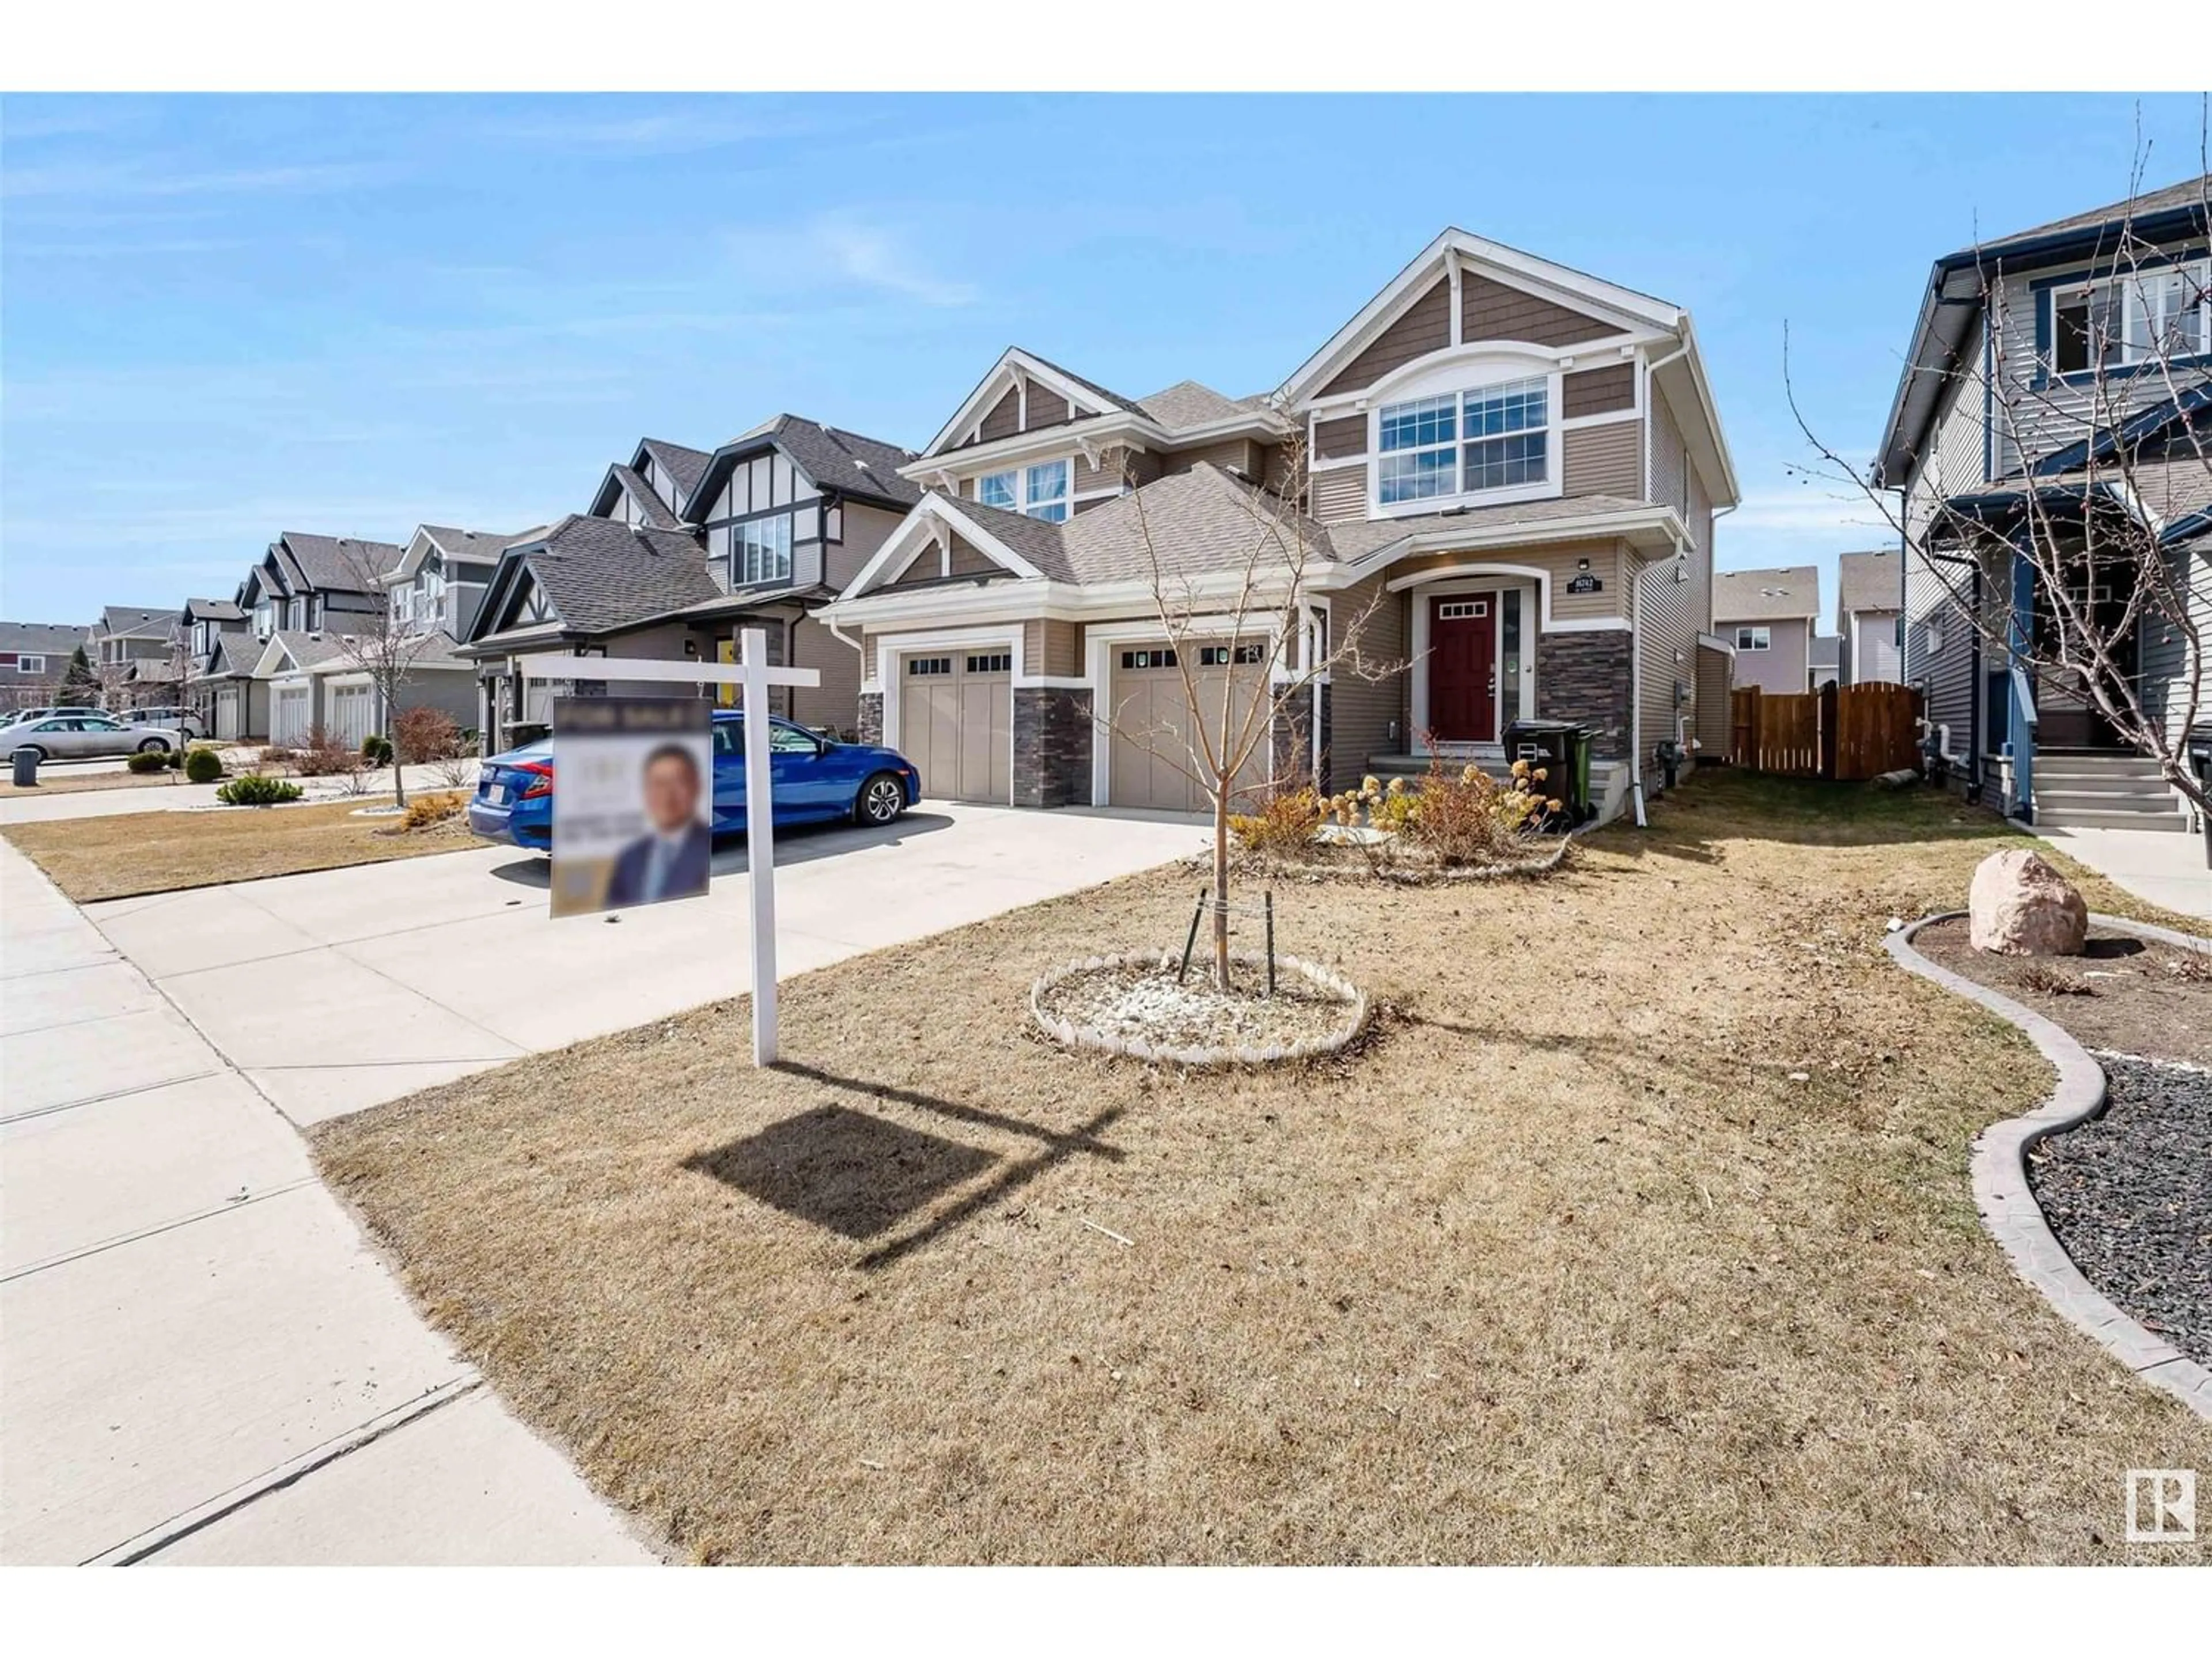 Frontside or backside of a home for 16742 64 ST NW, Edmonton Alberta T5Y3P8